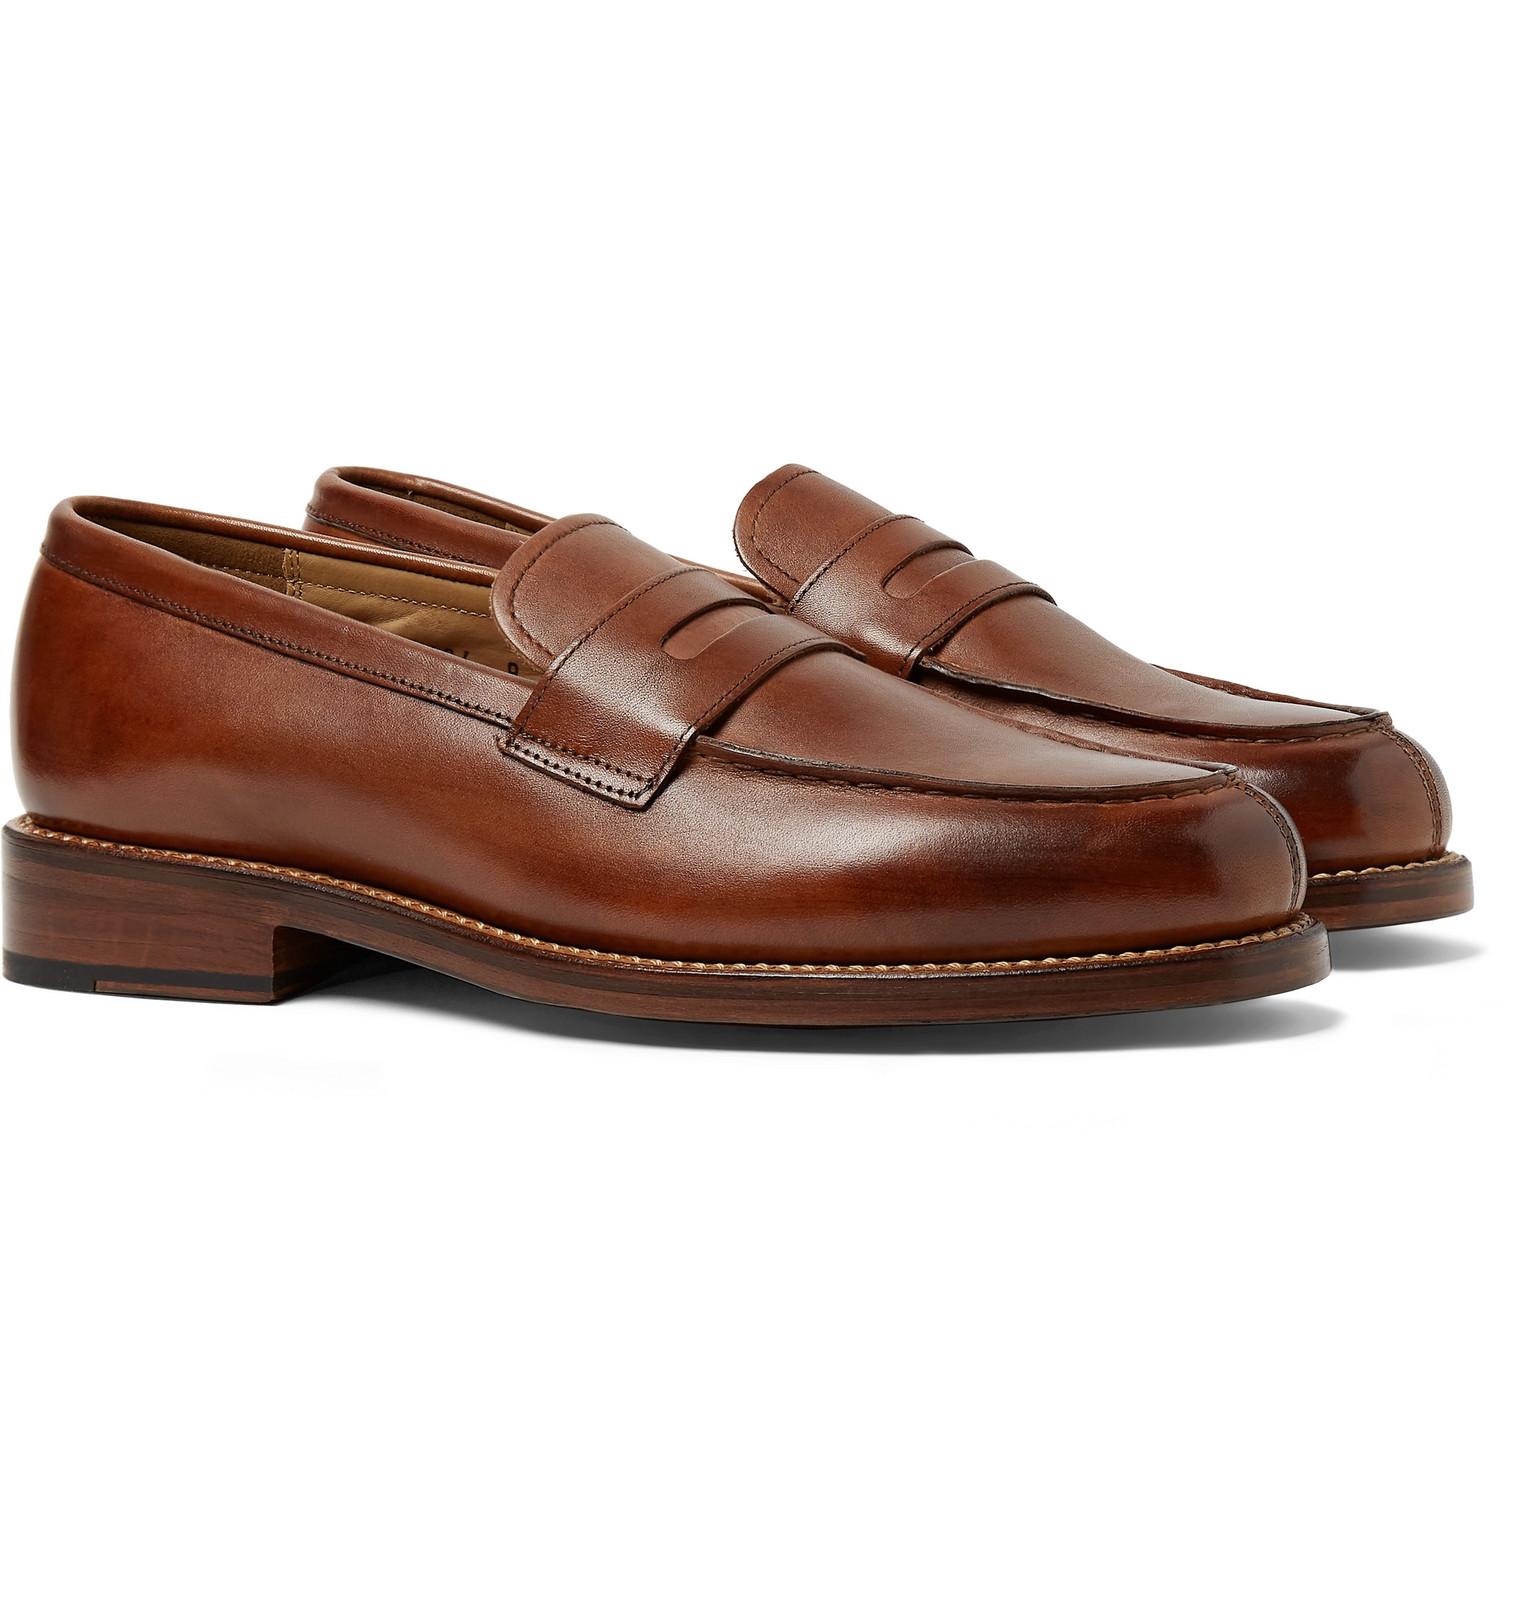 Grenson Peter Hand-painted Leather Penny Loafers in Brown for Men - Lyst